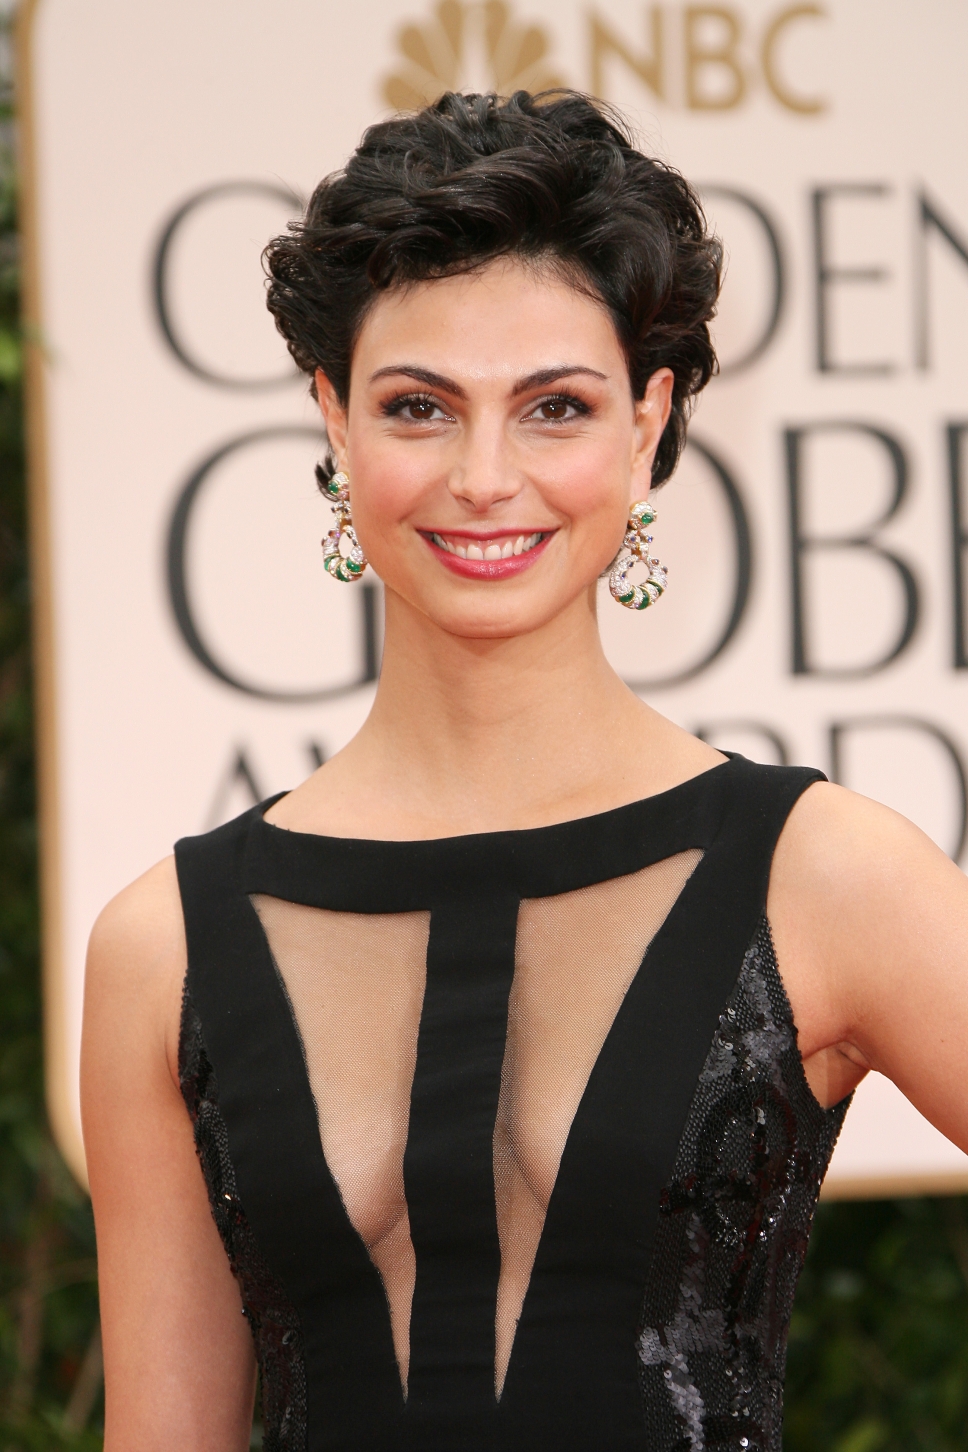 Morena Baccarin Pictures Hotness Rating Unrated